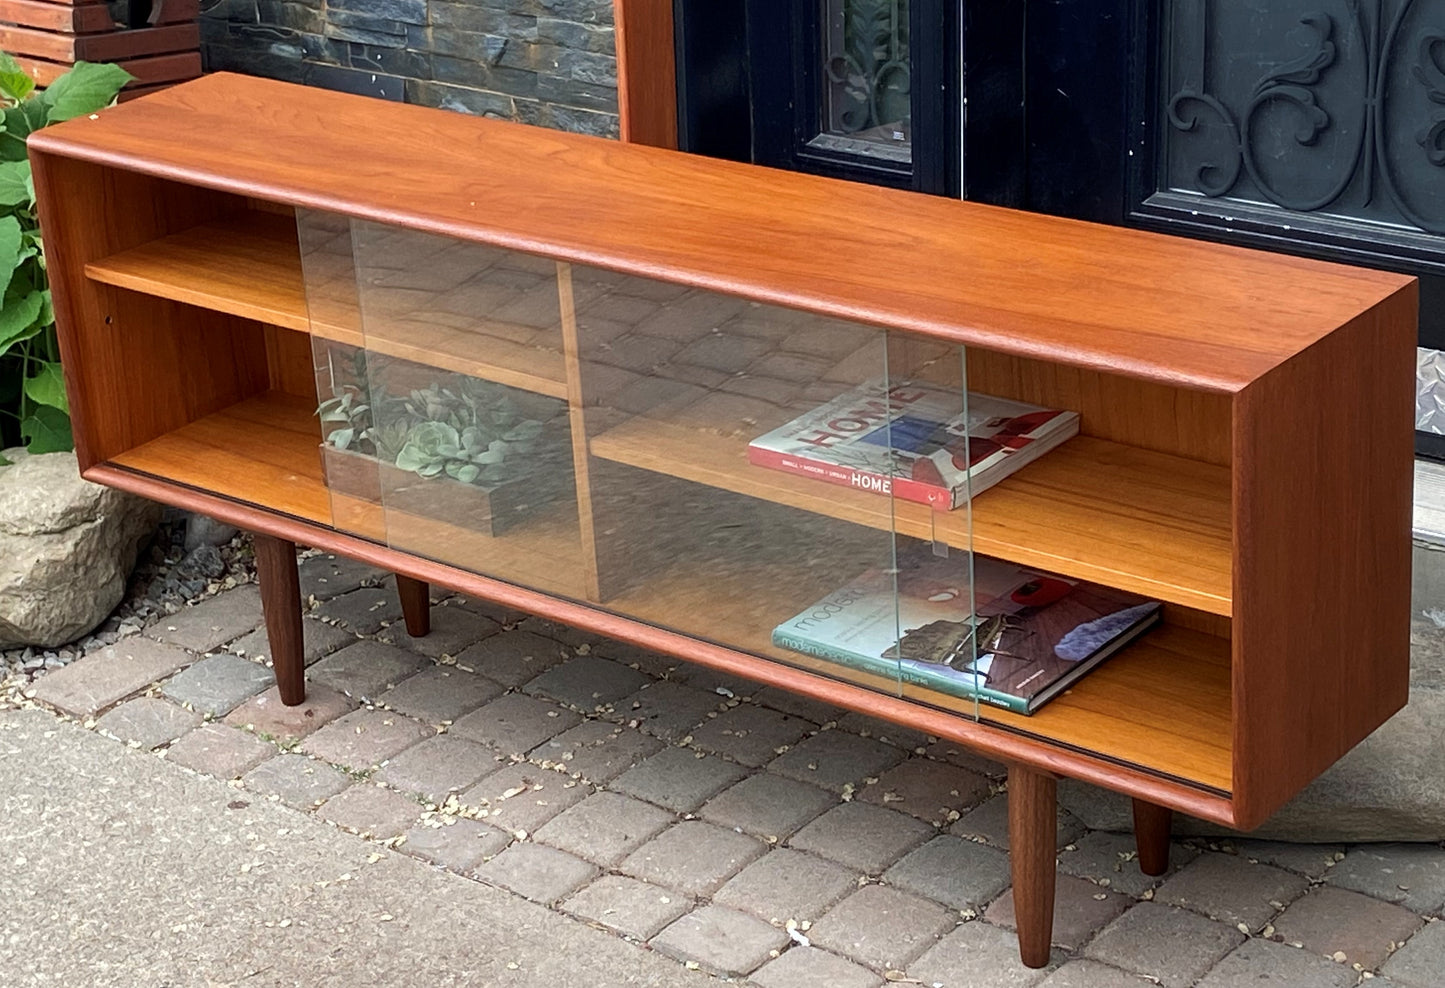 REFINISHED MCM Teak Bookcase Display Media Console 59.5", Perfect